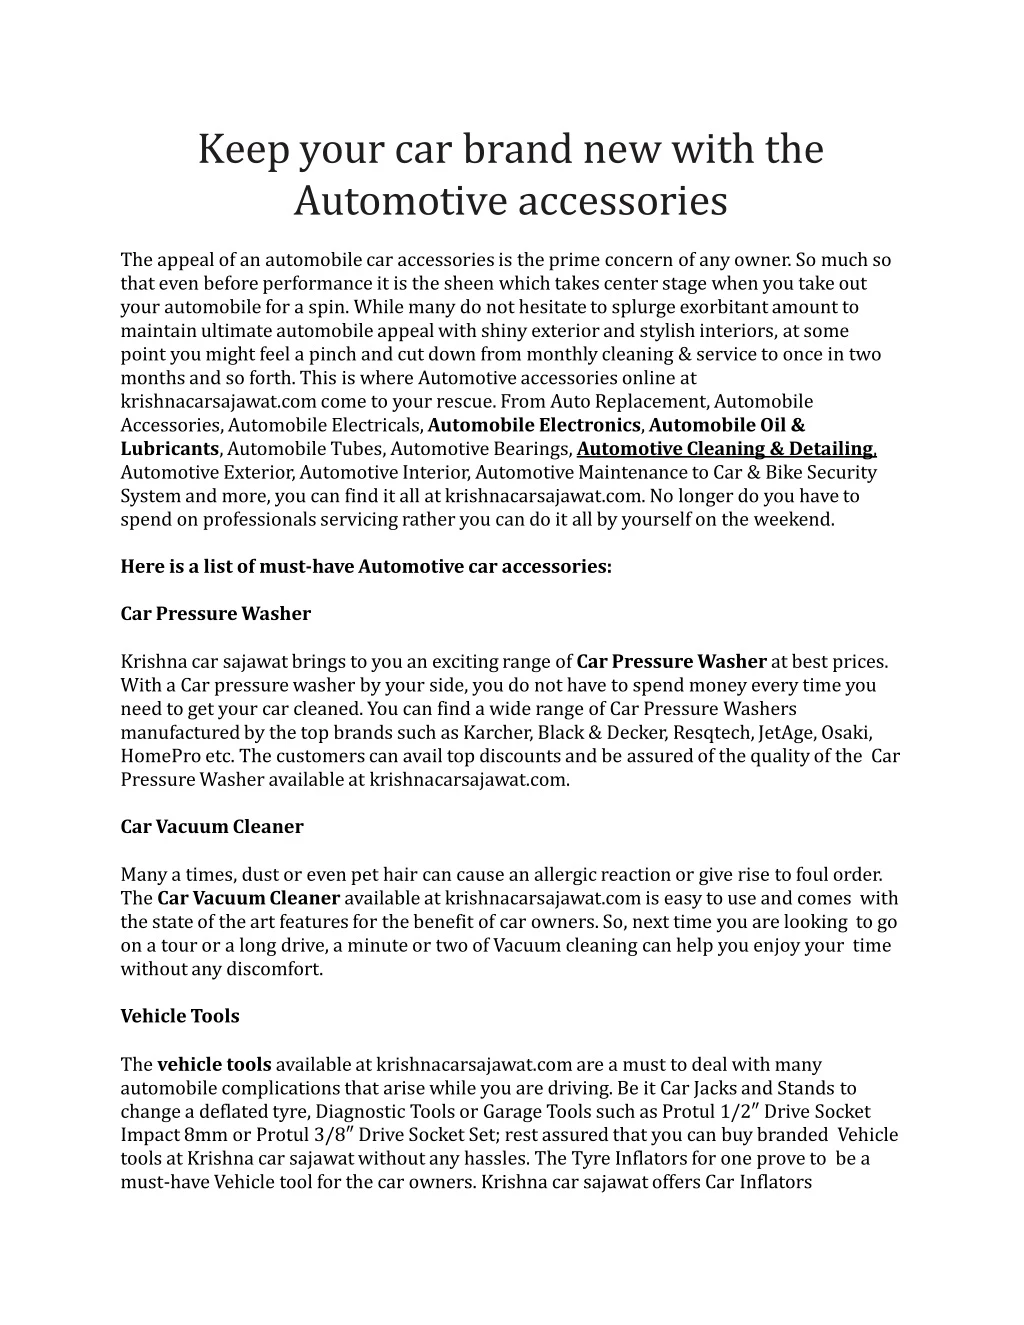 keep your car brand new with the automotive accessories